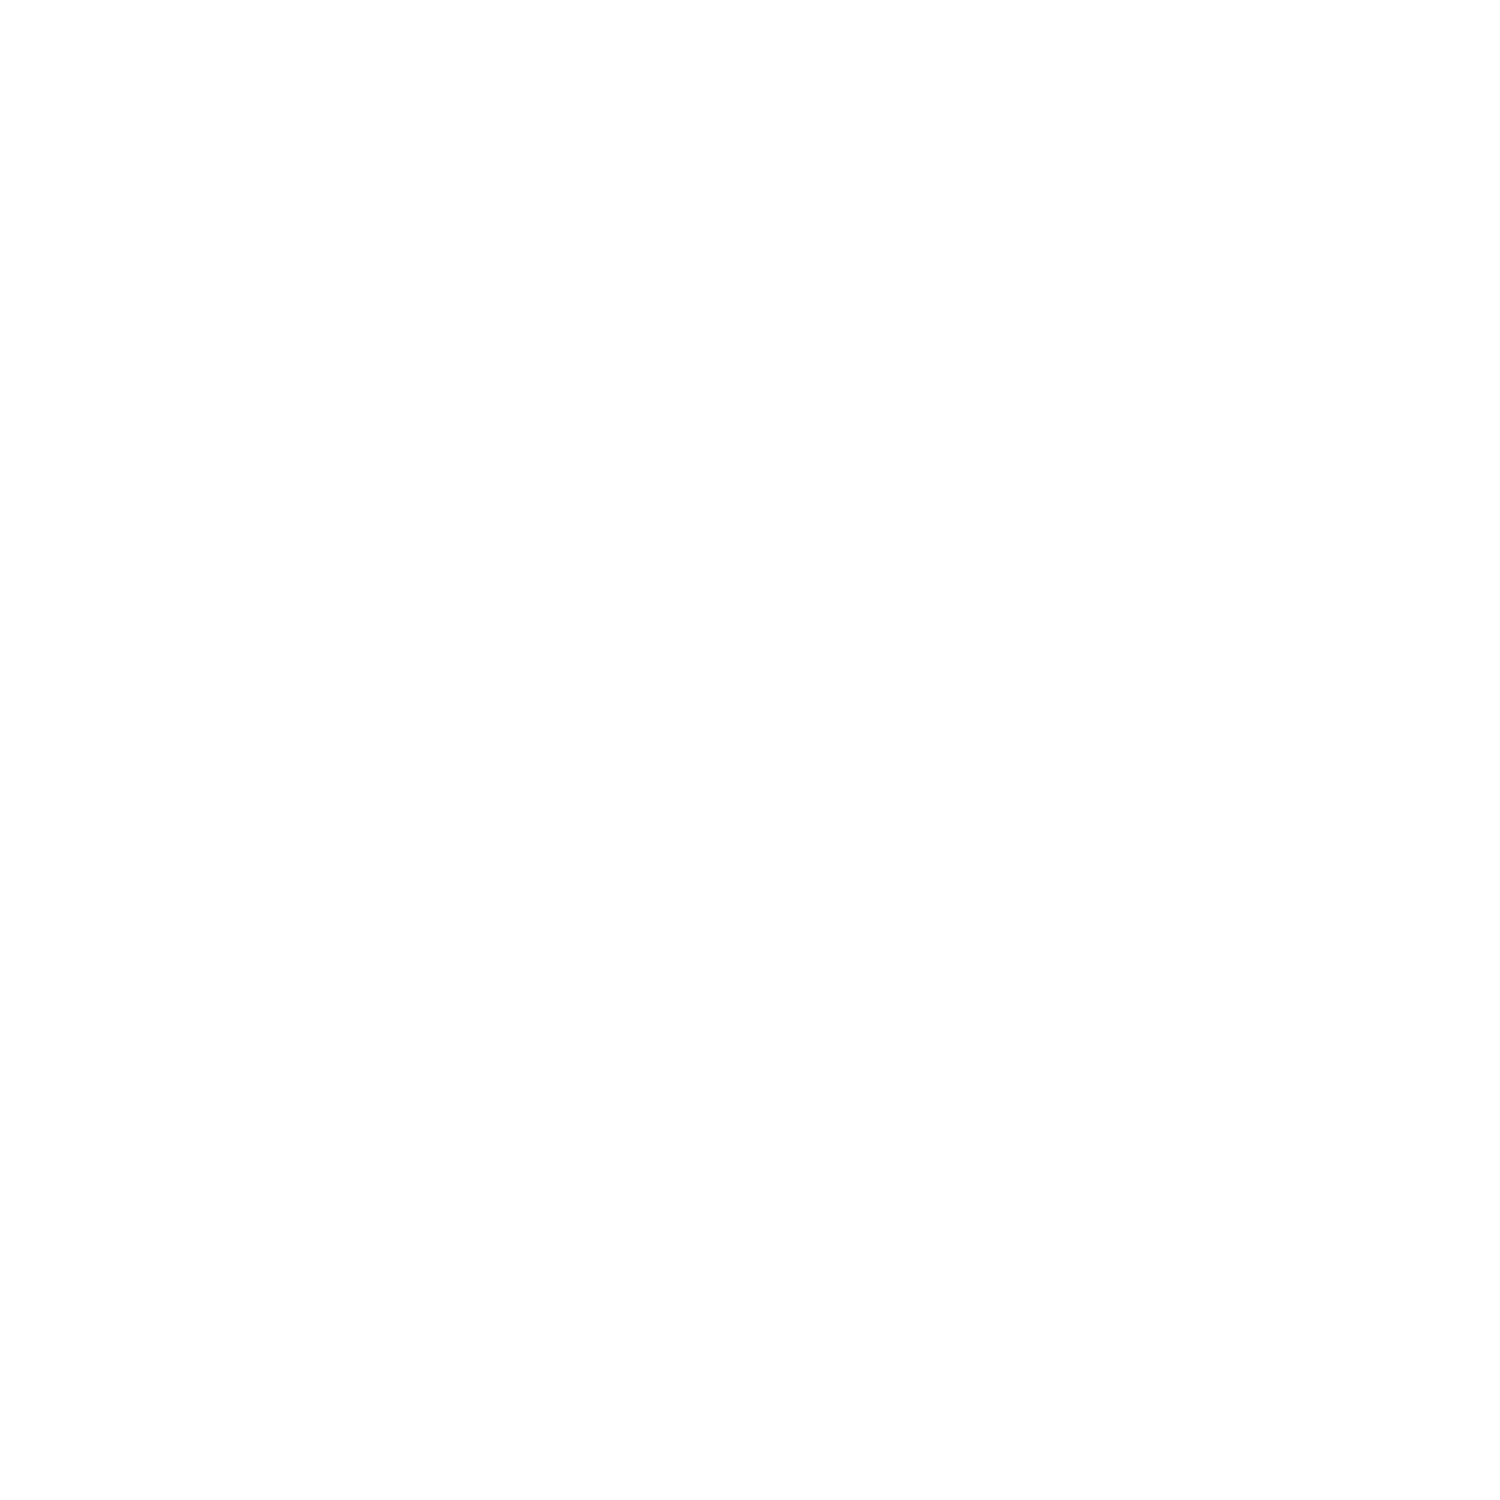 Glass Rose Productions